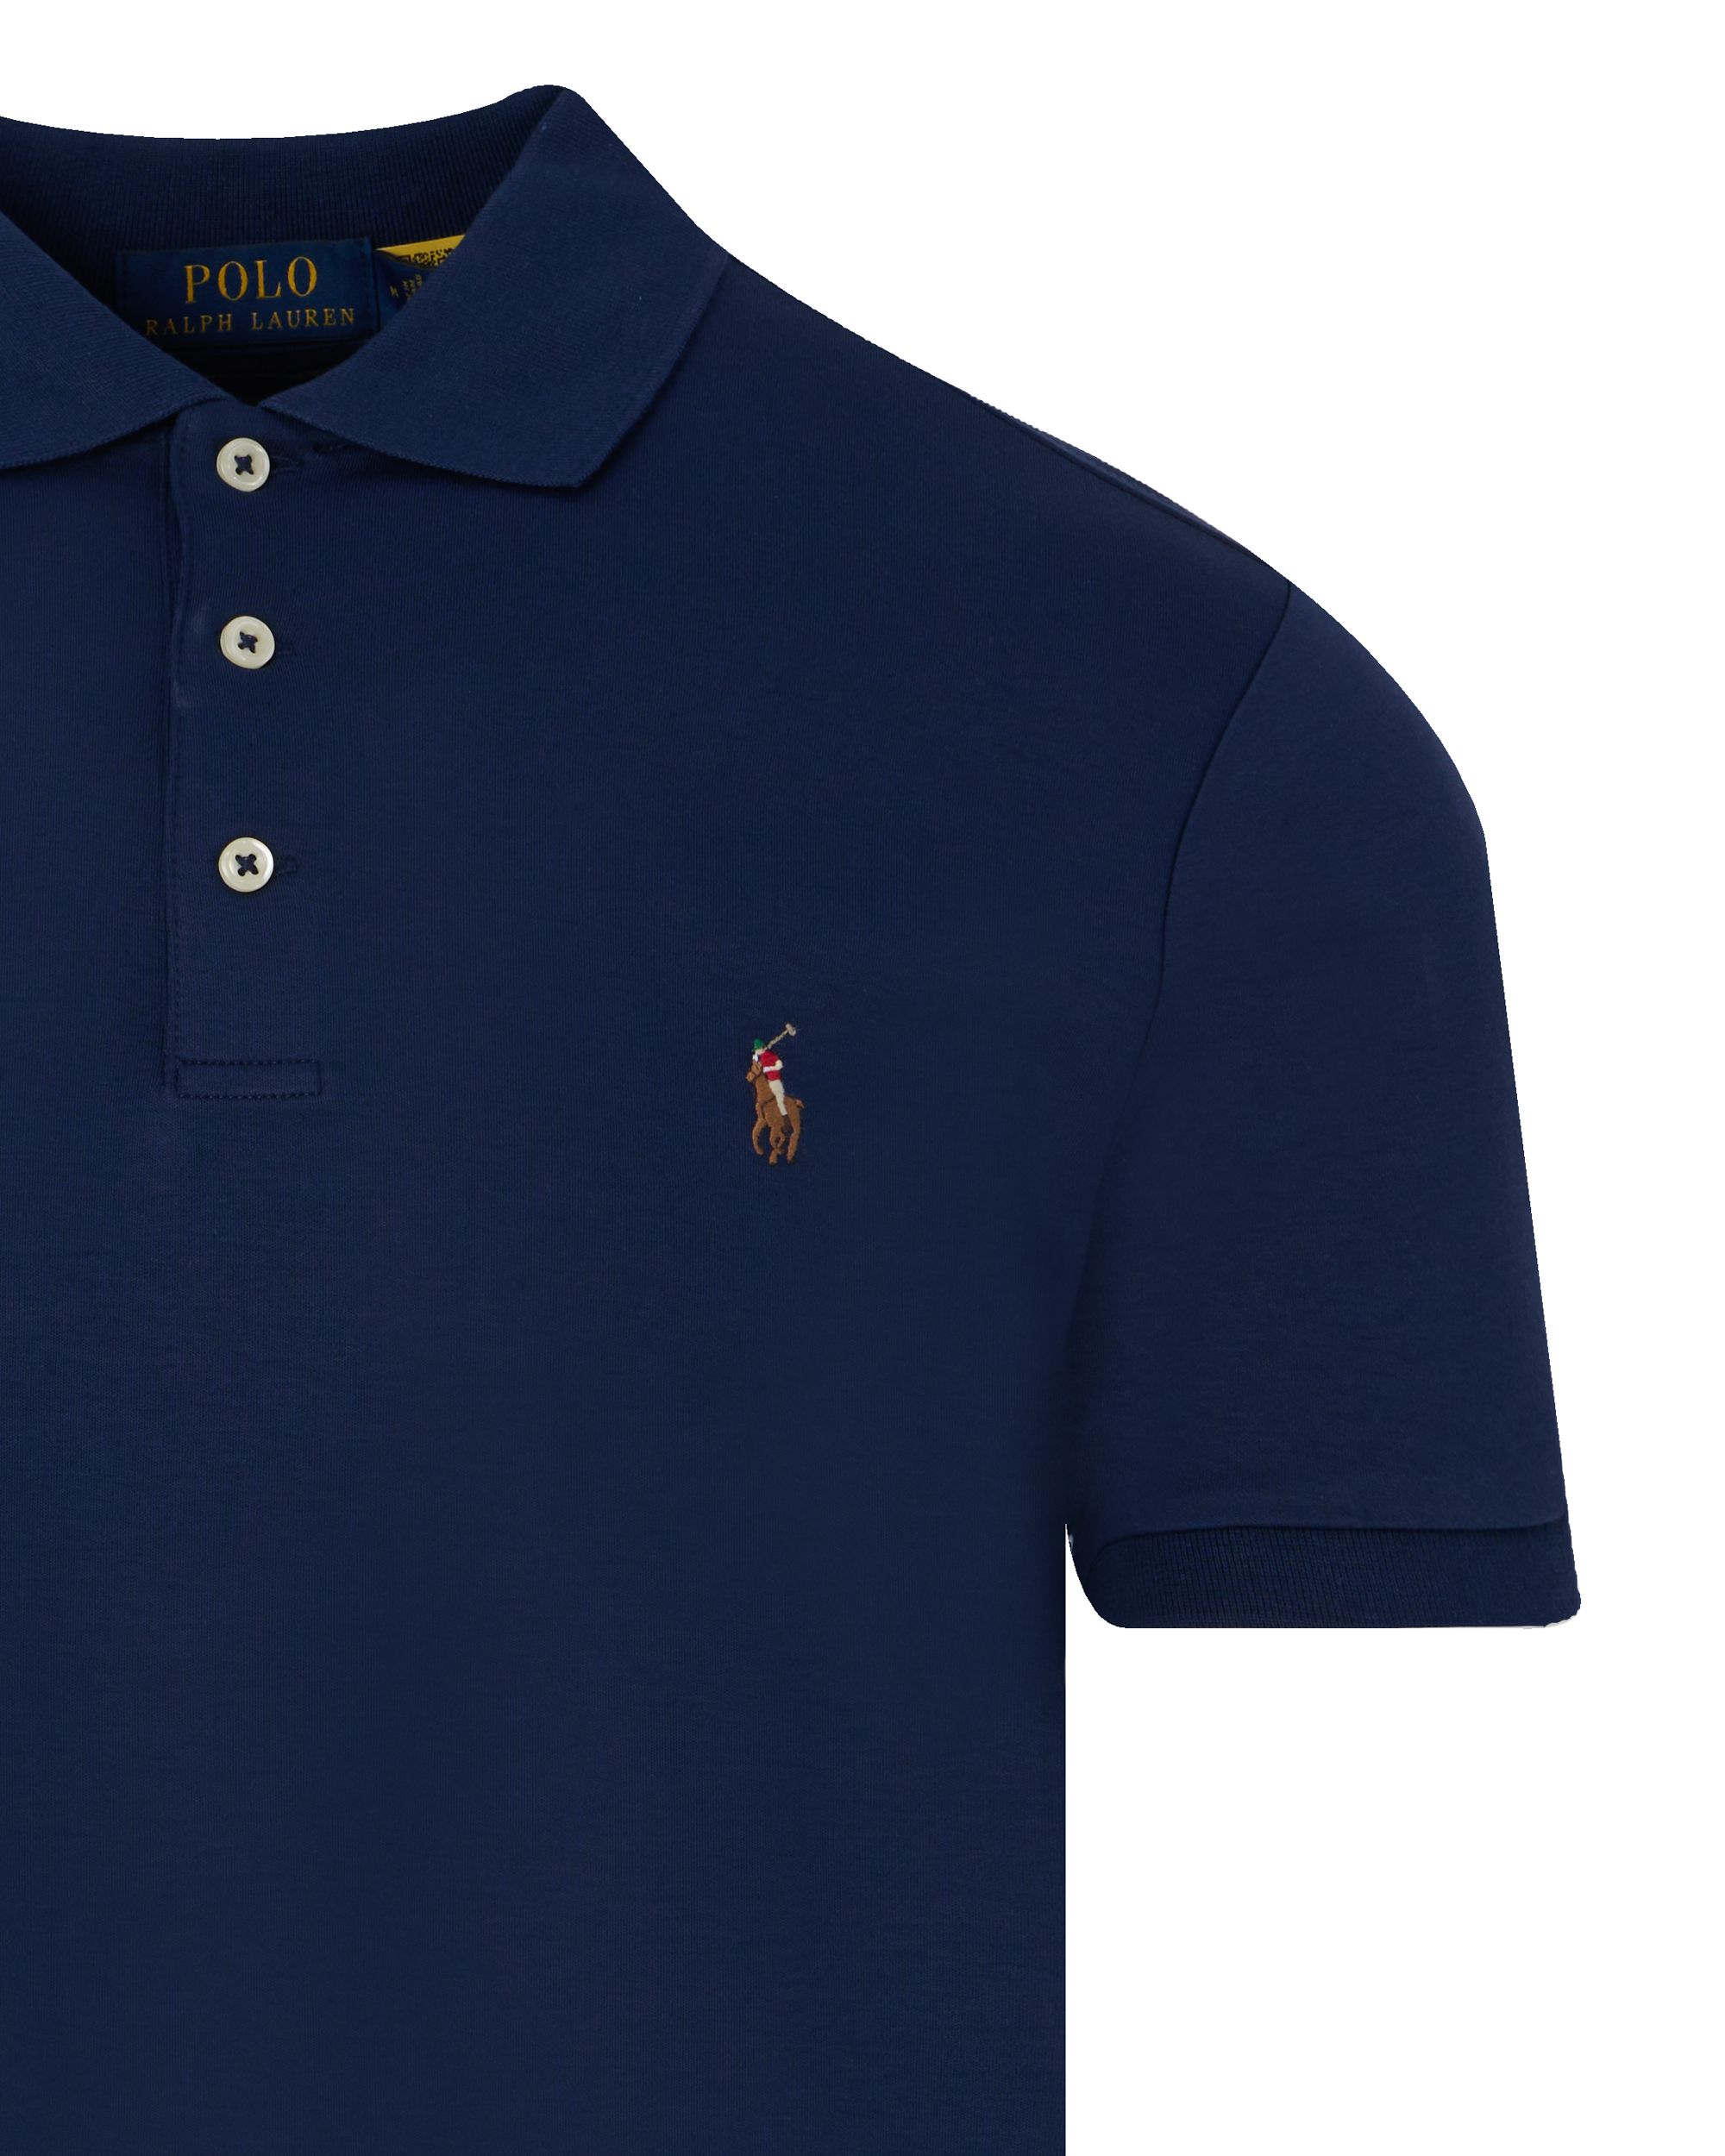 Polo Ralph Lauren Slim Fit Soft Touch Polo KM Donker blauw 086568-001-L